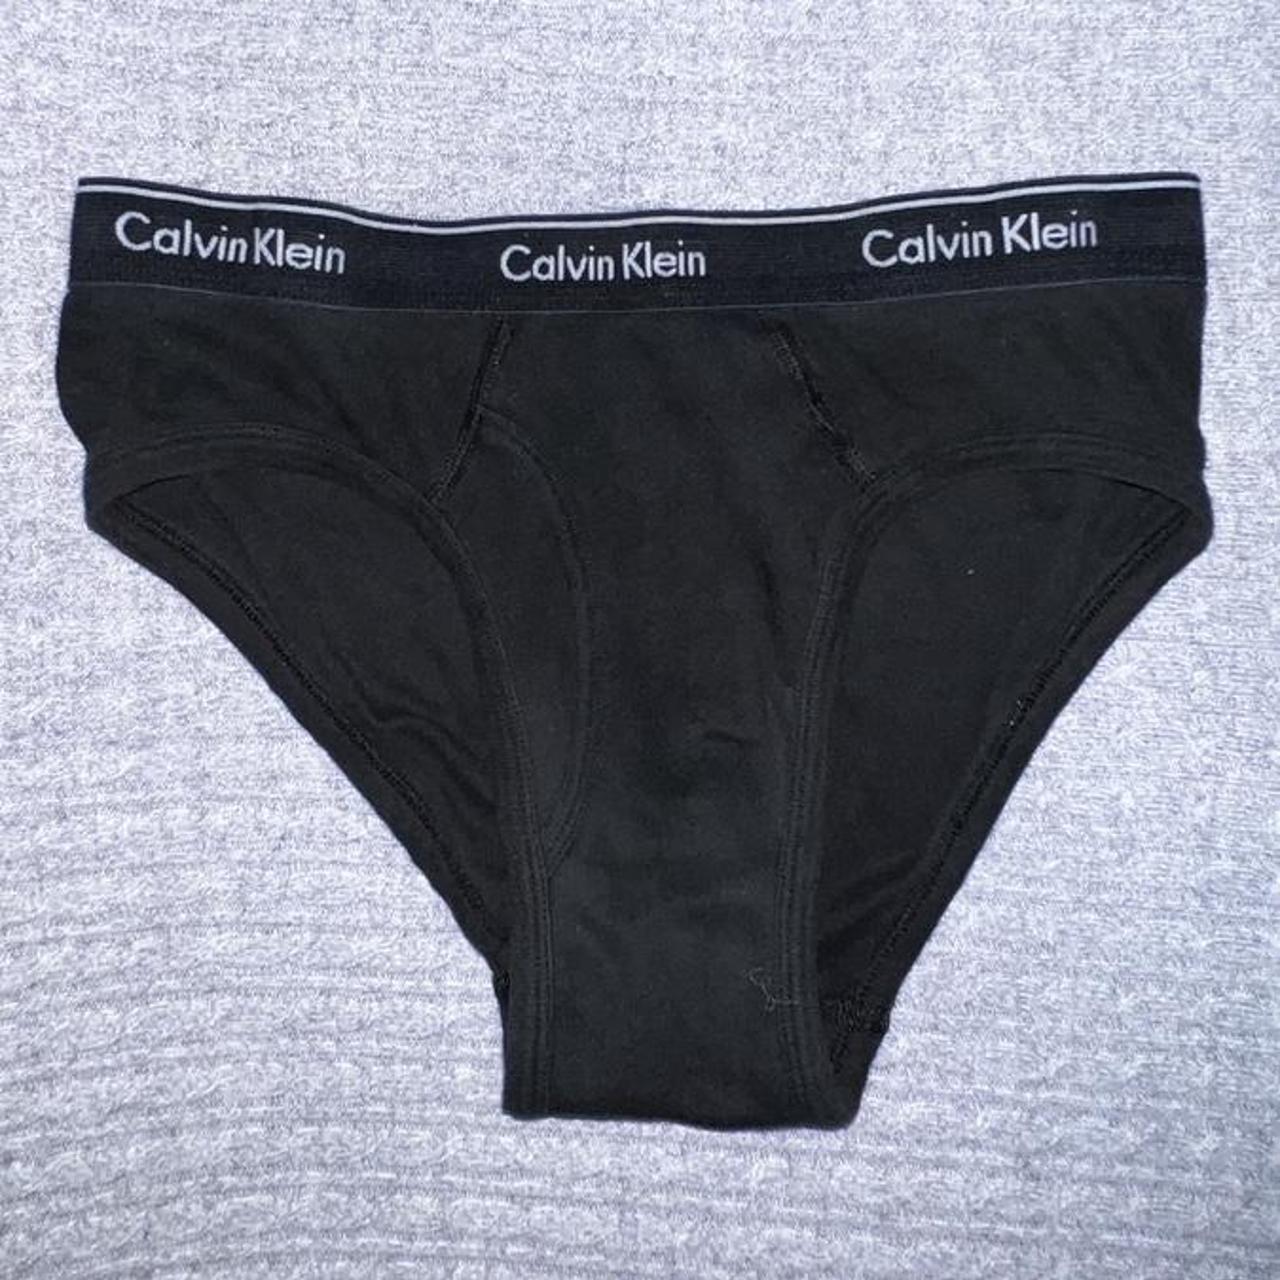 SEXY underwear - used Get a HOT look with this - Depop